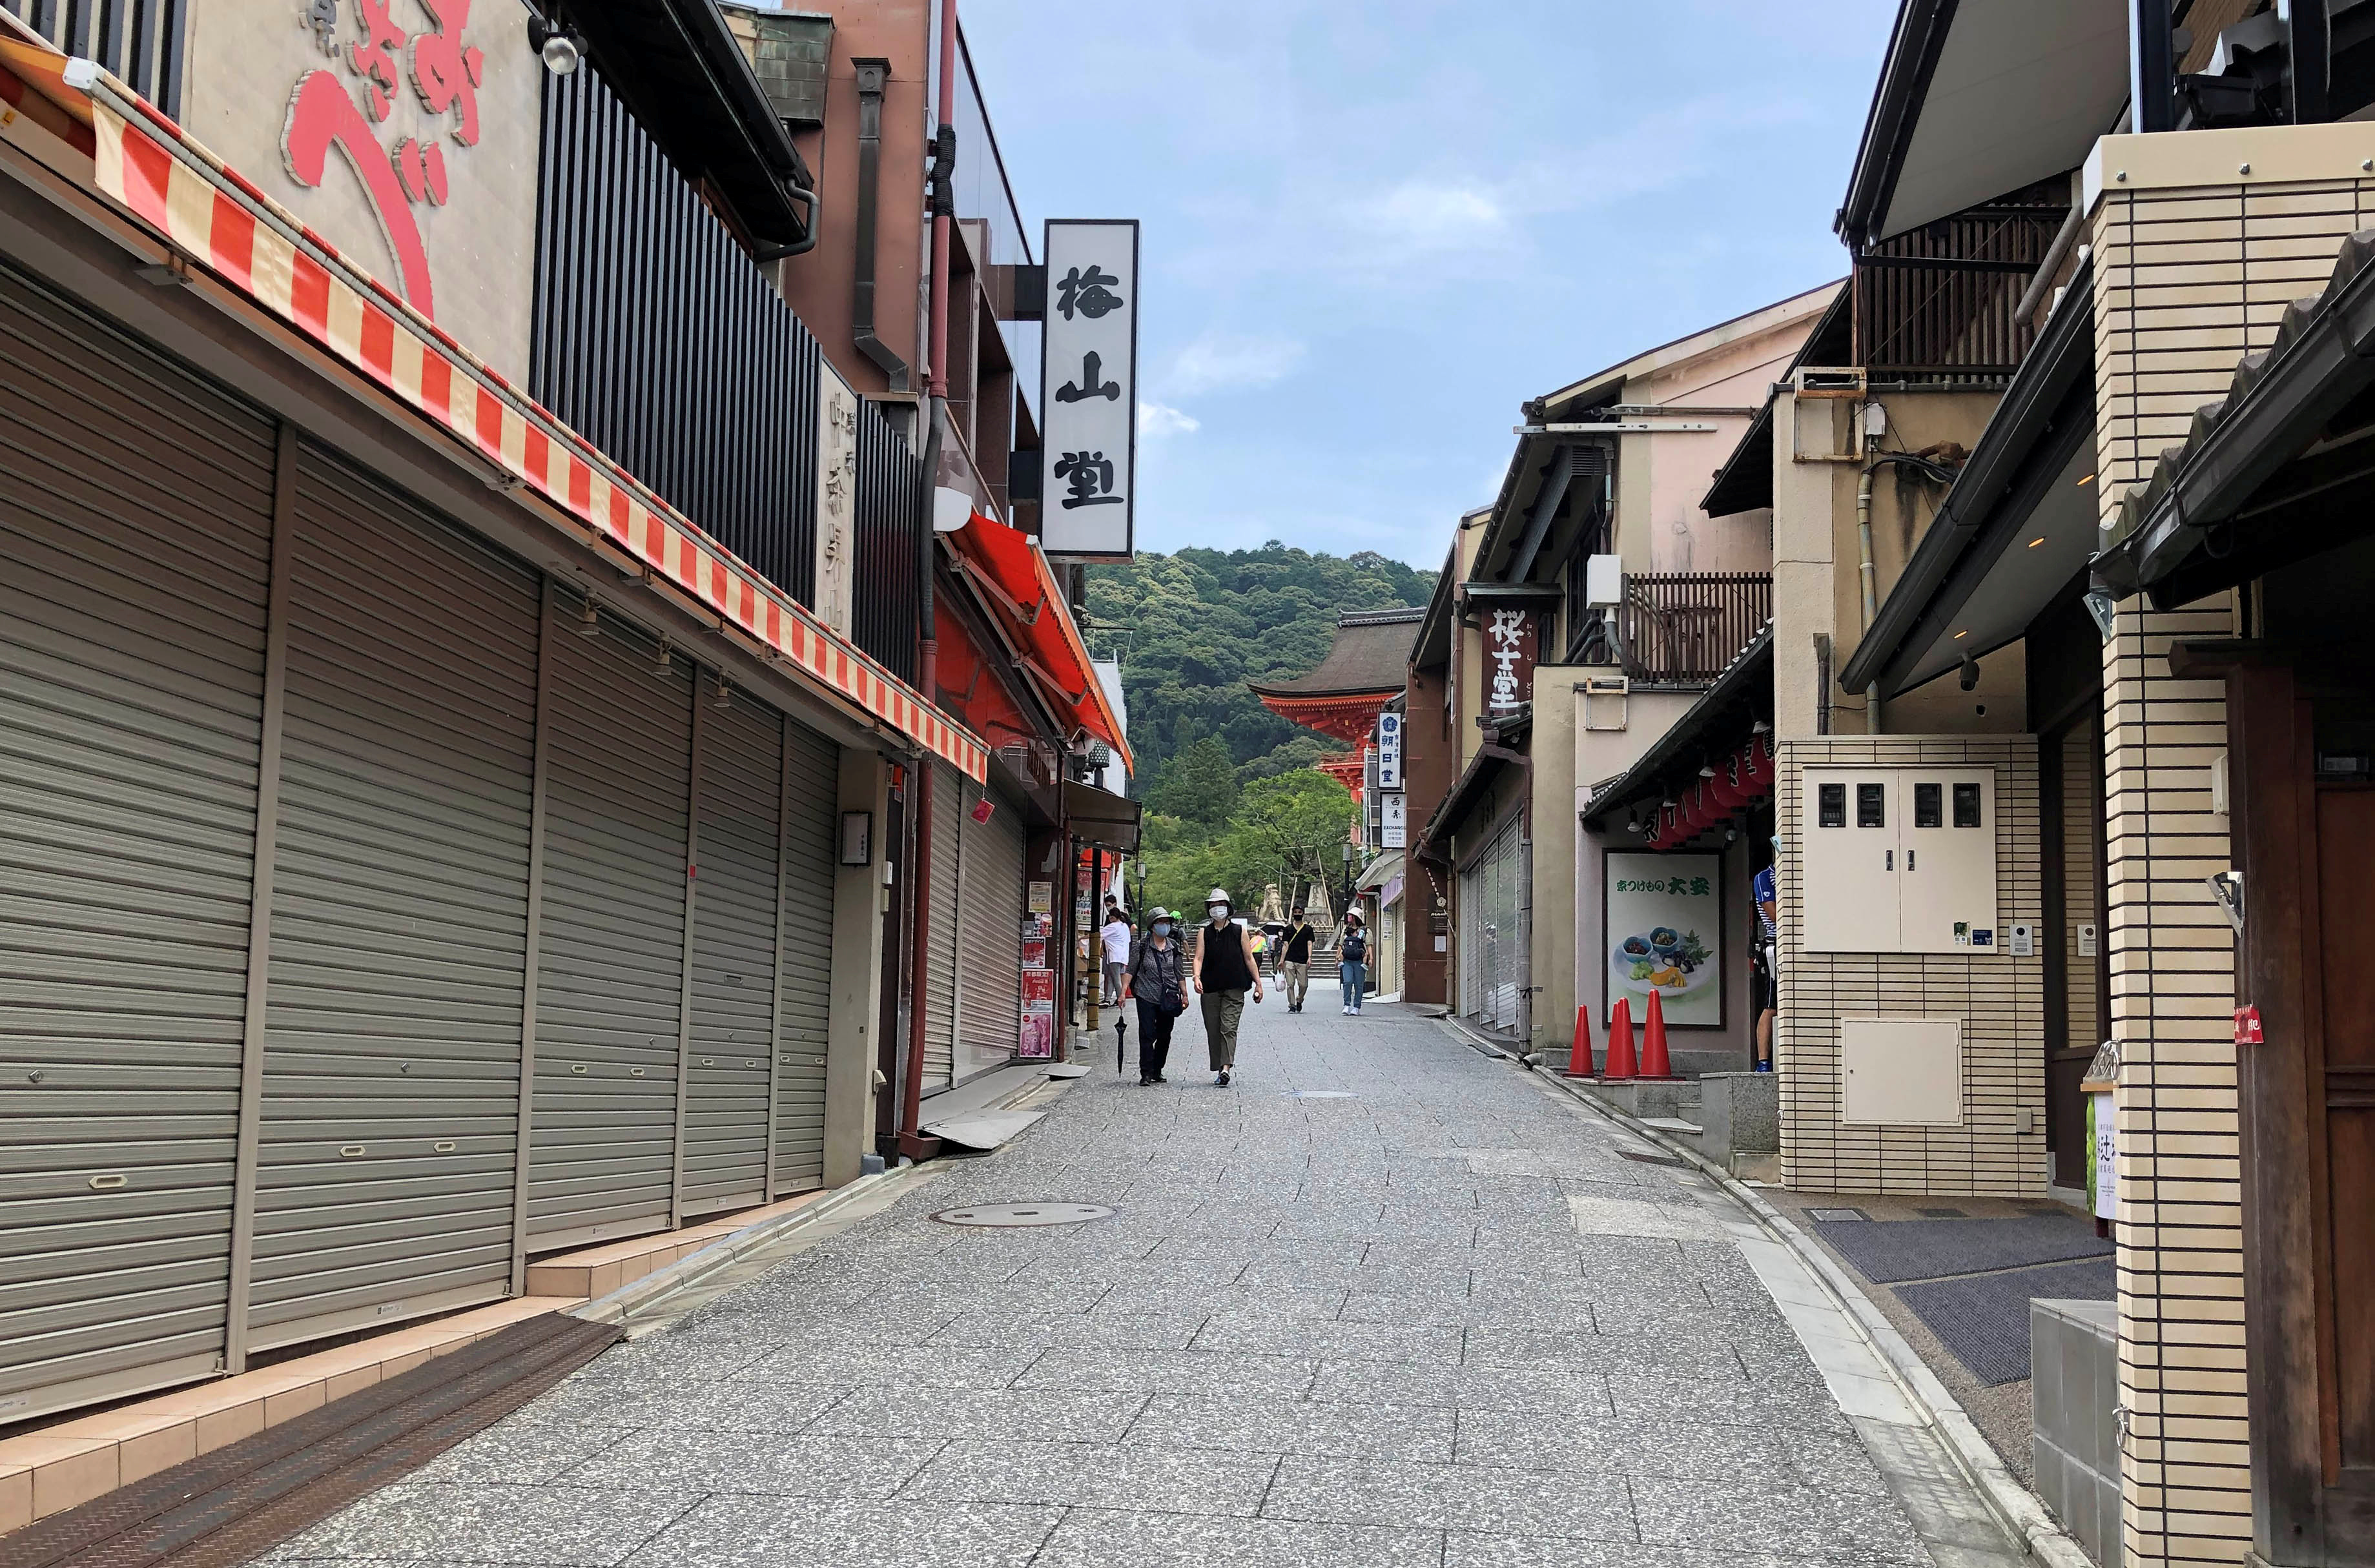 An empty street near the previously crowded Kiyomizu temple, a popular attraction among tourists, is pictured amid the coronavirus disease (COVID-19) outbreak in Kyoto